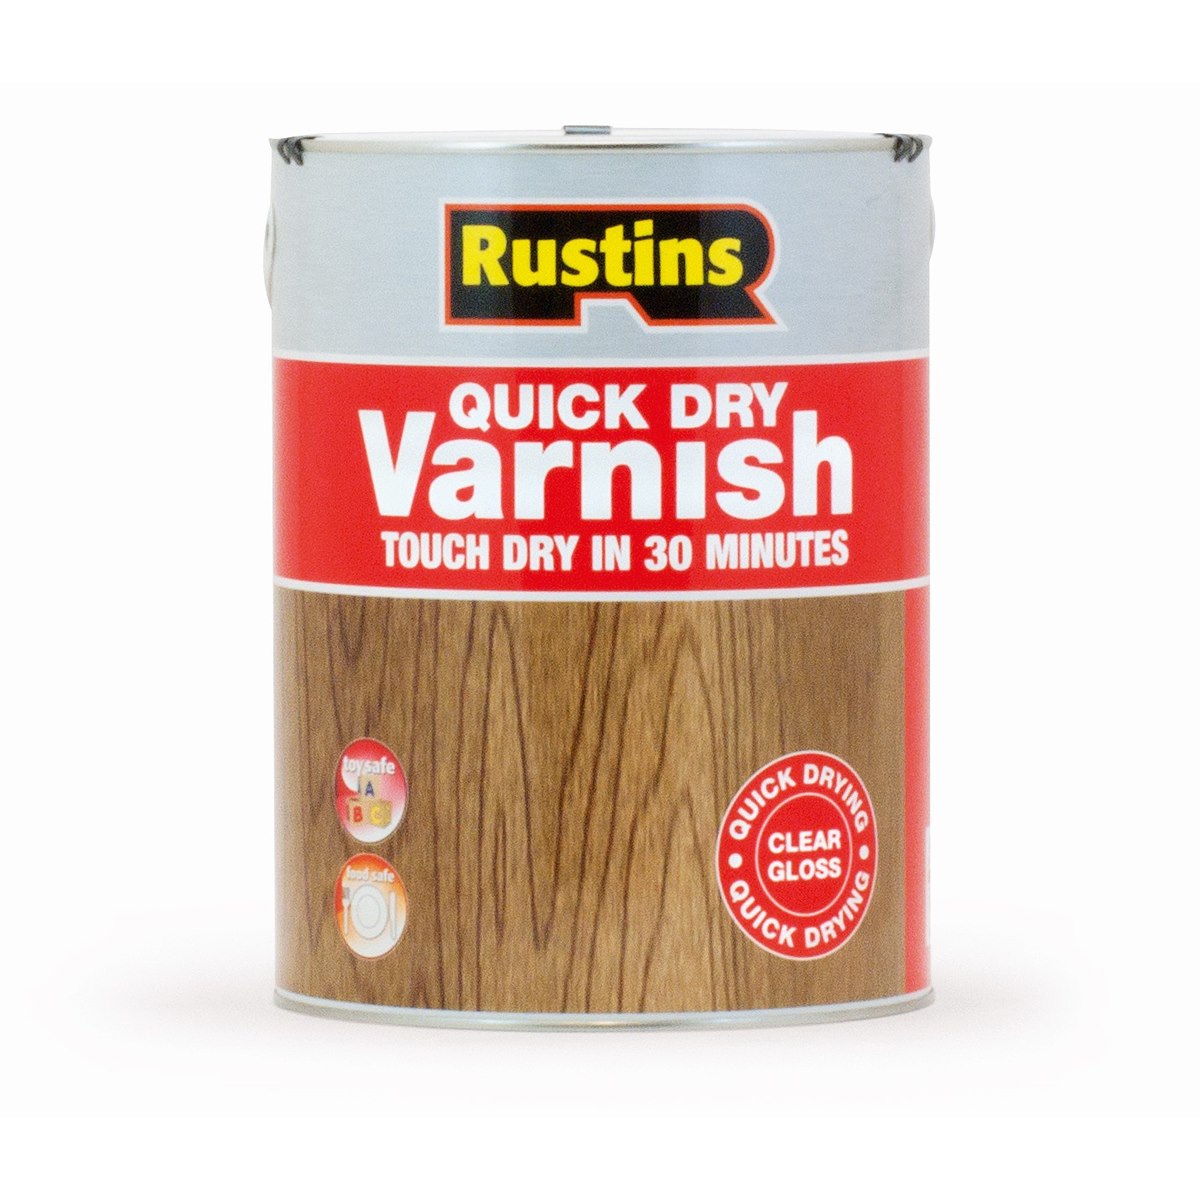 Rustins Quick Dry Varnish Gloss Clear 5 Litre